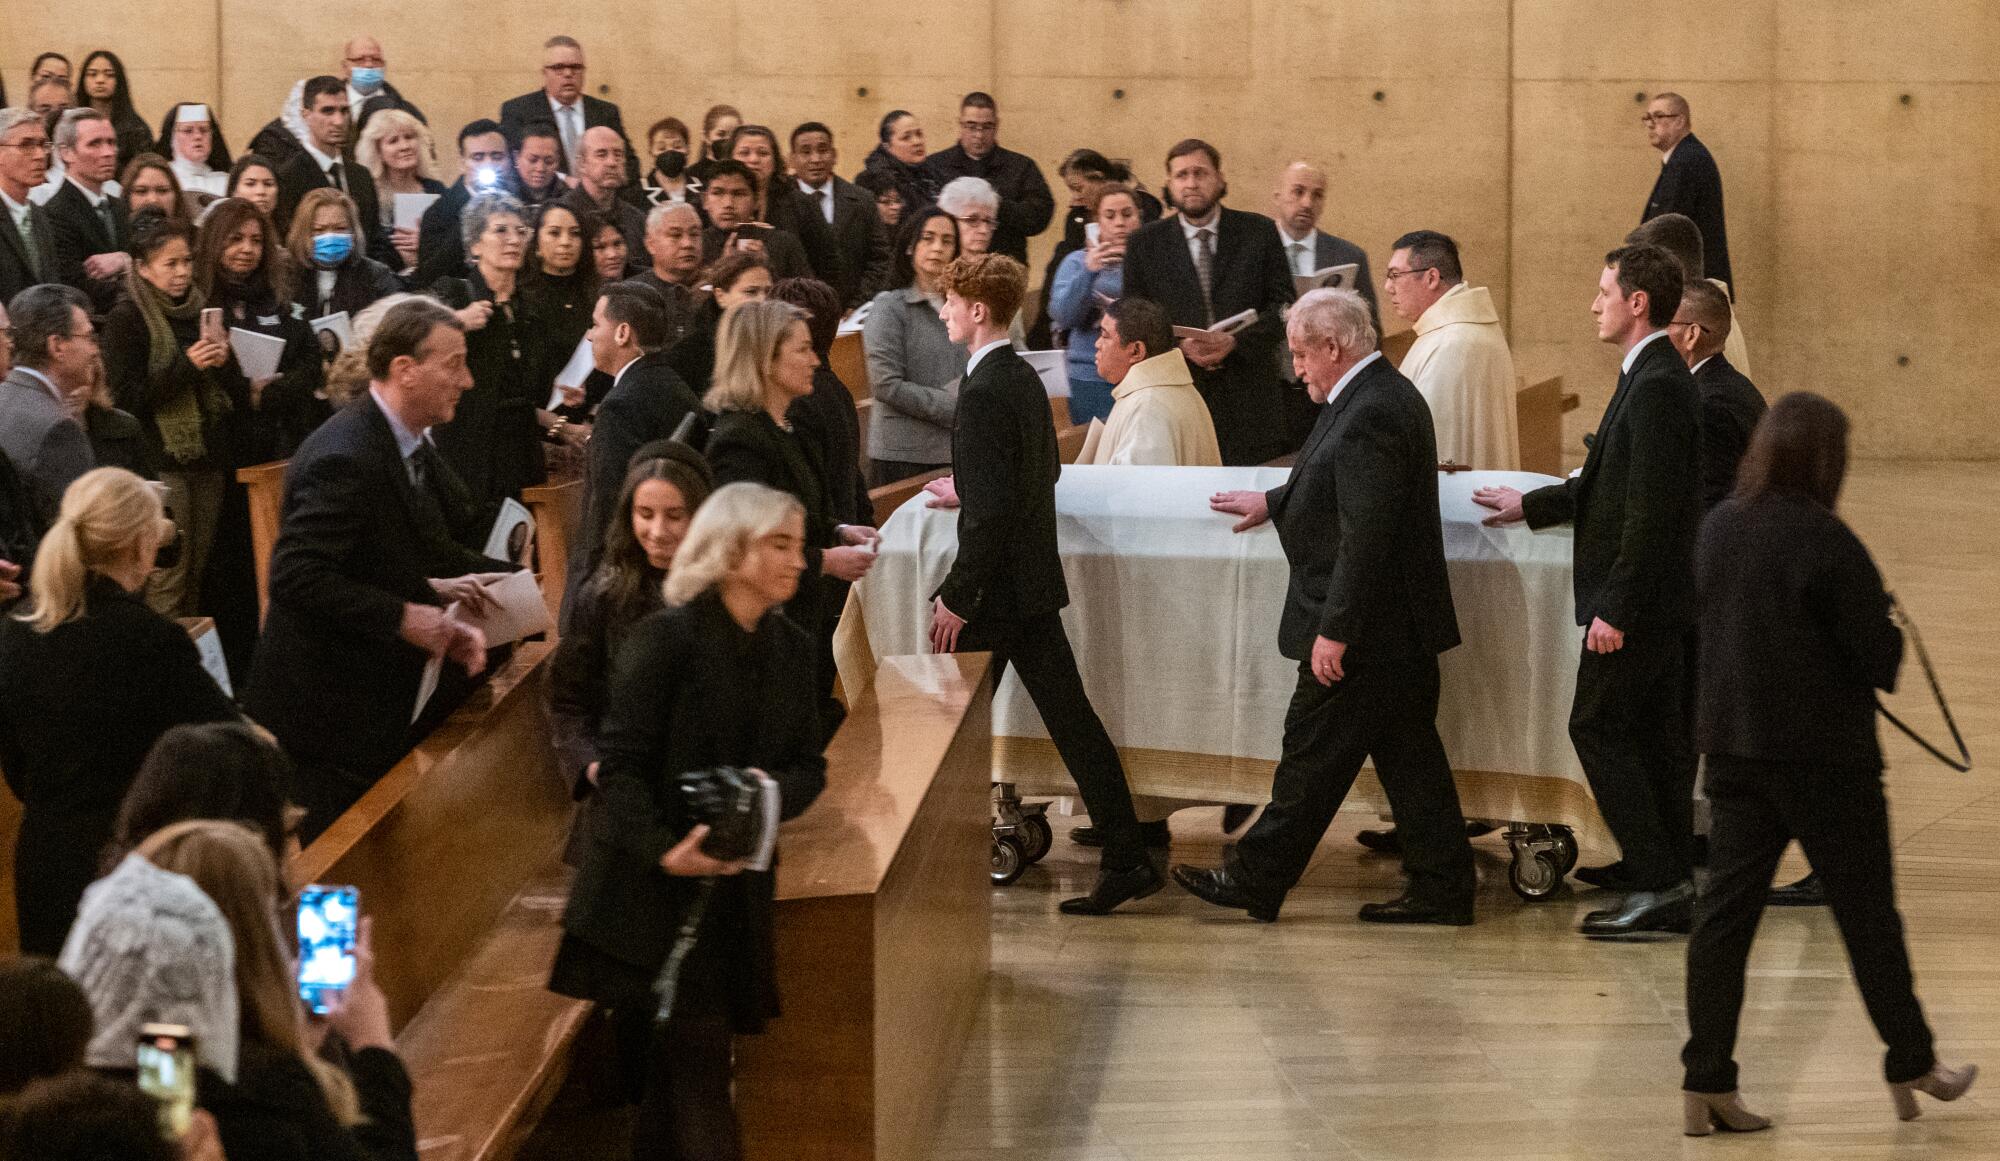 Relatives of the bishop walk with the casket after the vigil Mass